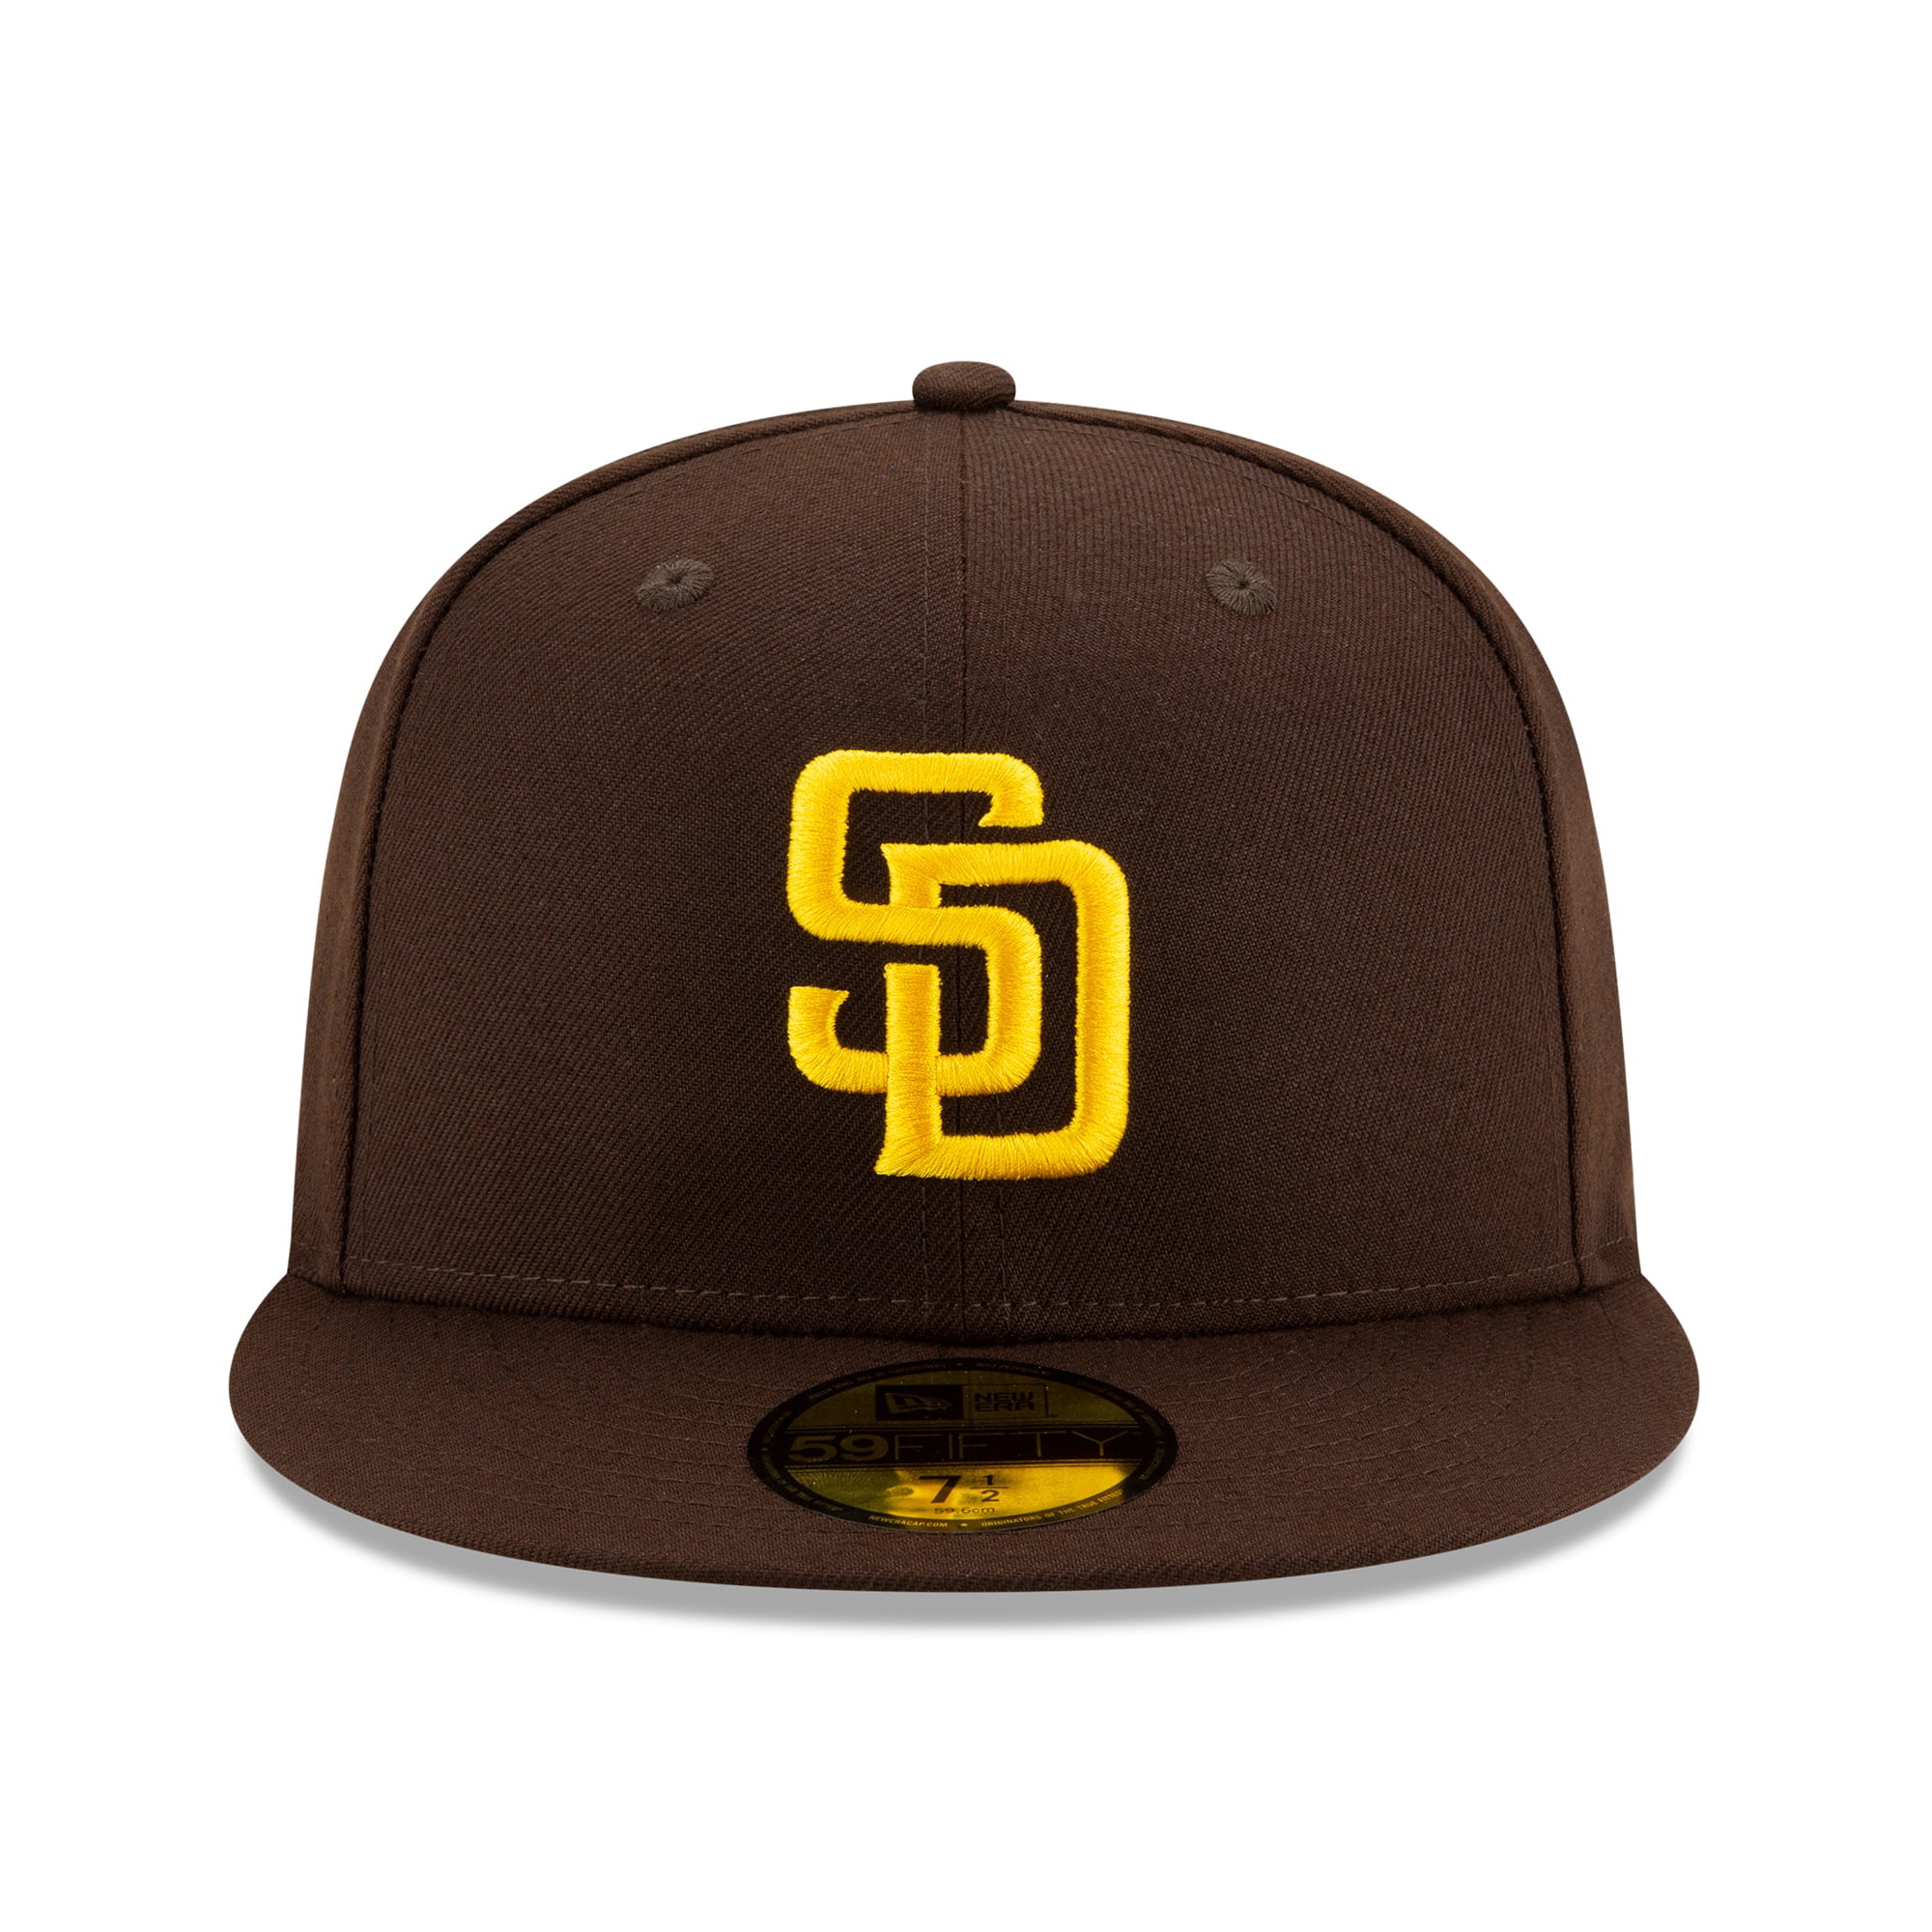 Men's New Era Brown San Diego Padres Authentic Collection On-Field